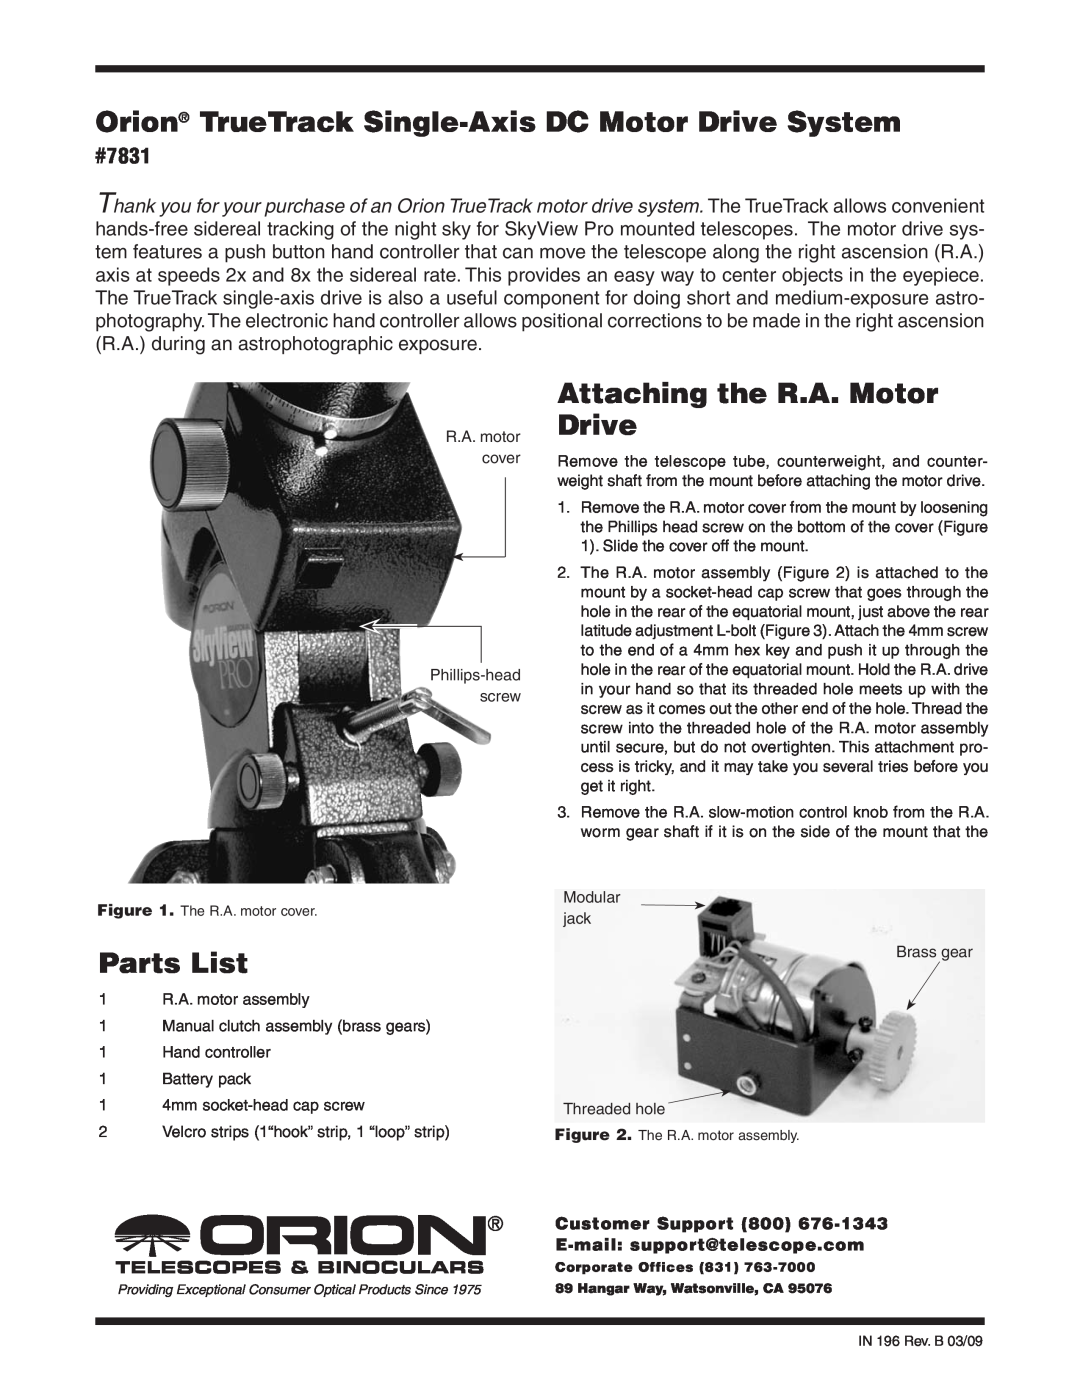 Orion manual Orion TrueTrack Single-AxisDC Motor Drive System, Attaching the R.A. Motor Drive, Parts List, #7831 